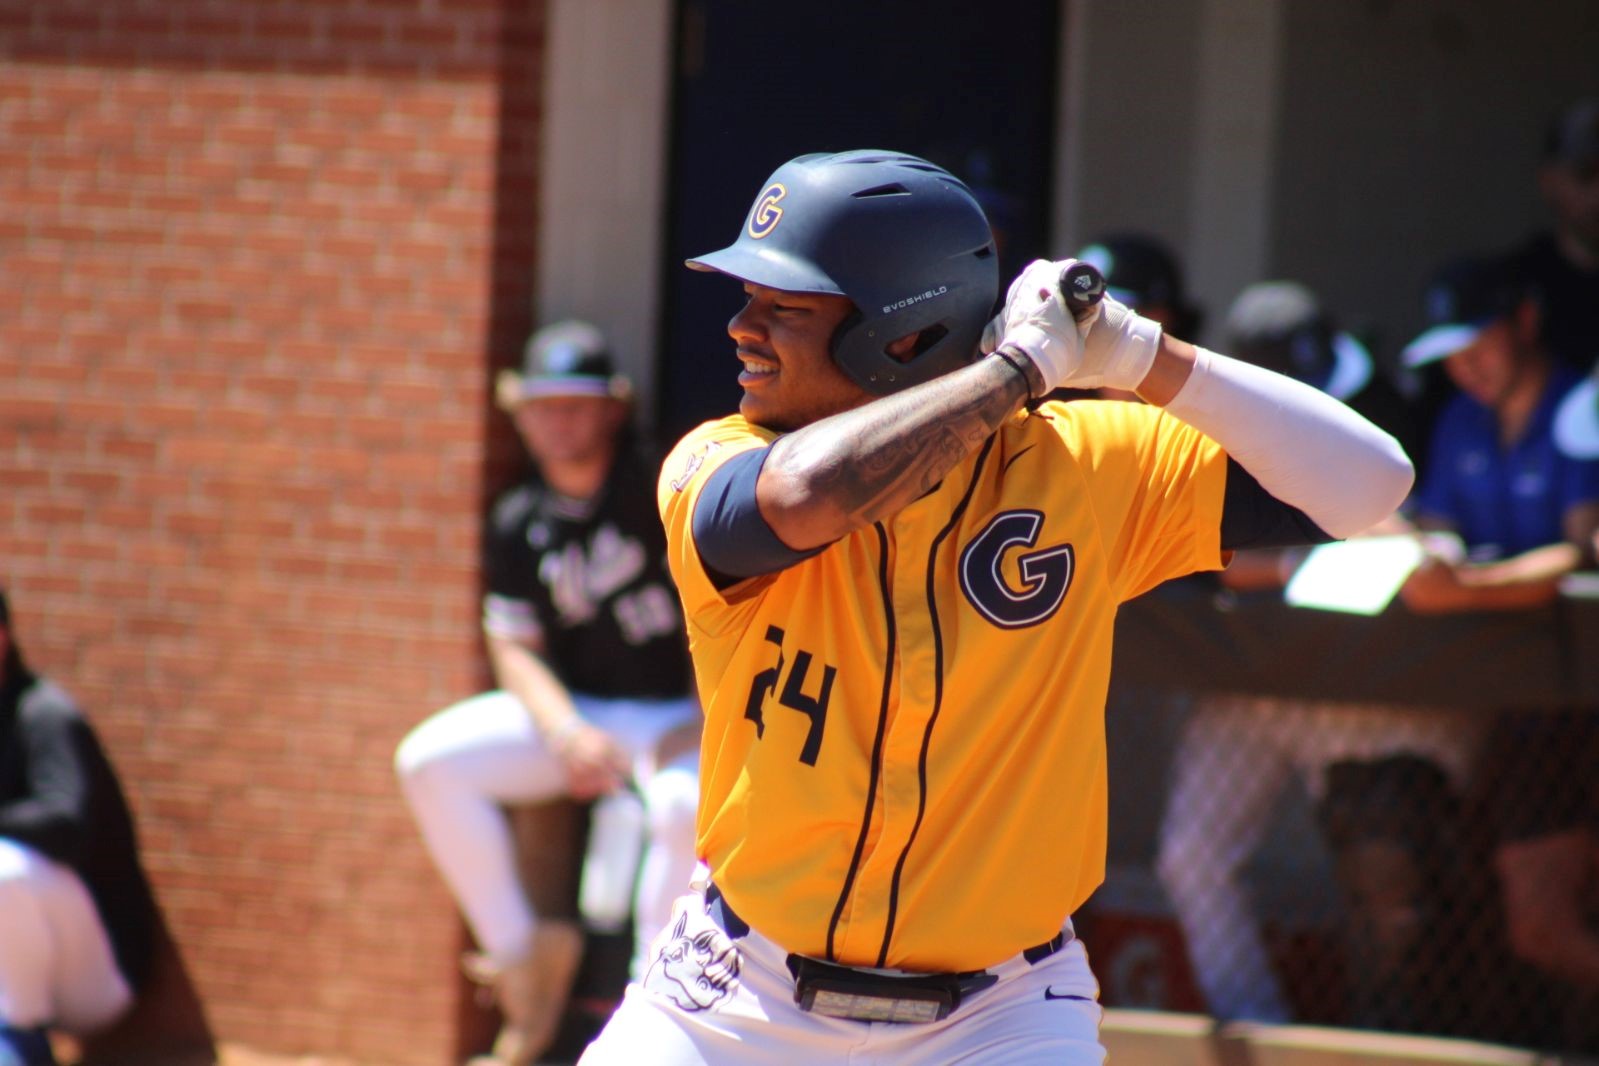 Freddie Oliver had three hits, including two home runs, and six RBIs in Wednesday's 15-7 victory at Fayetteville Tech.